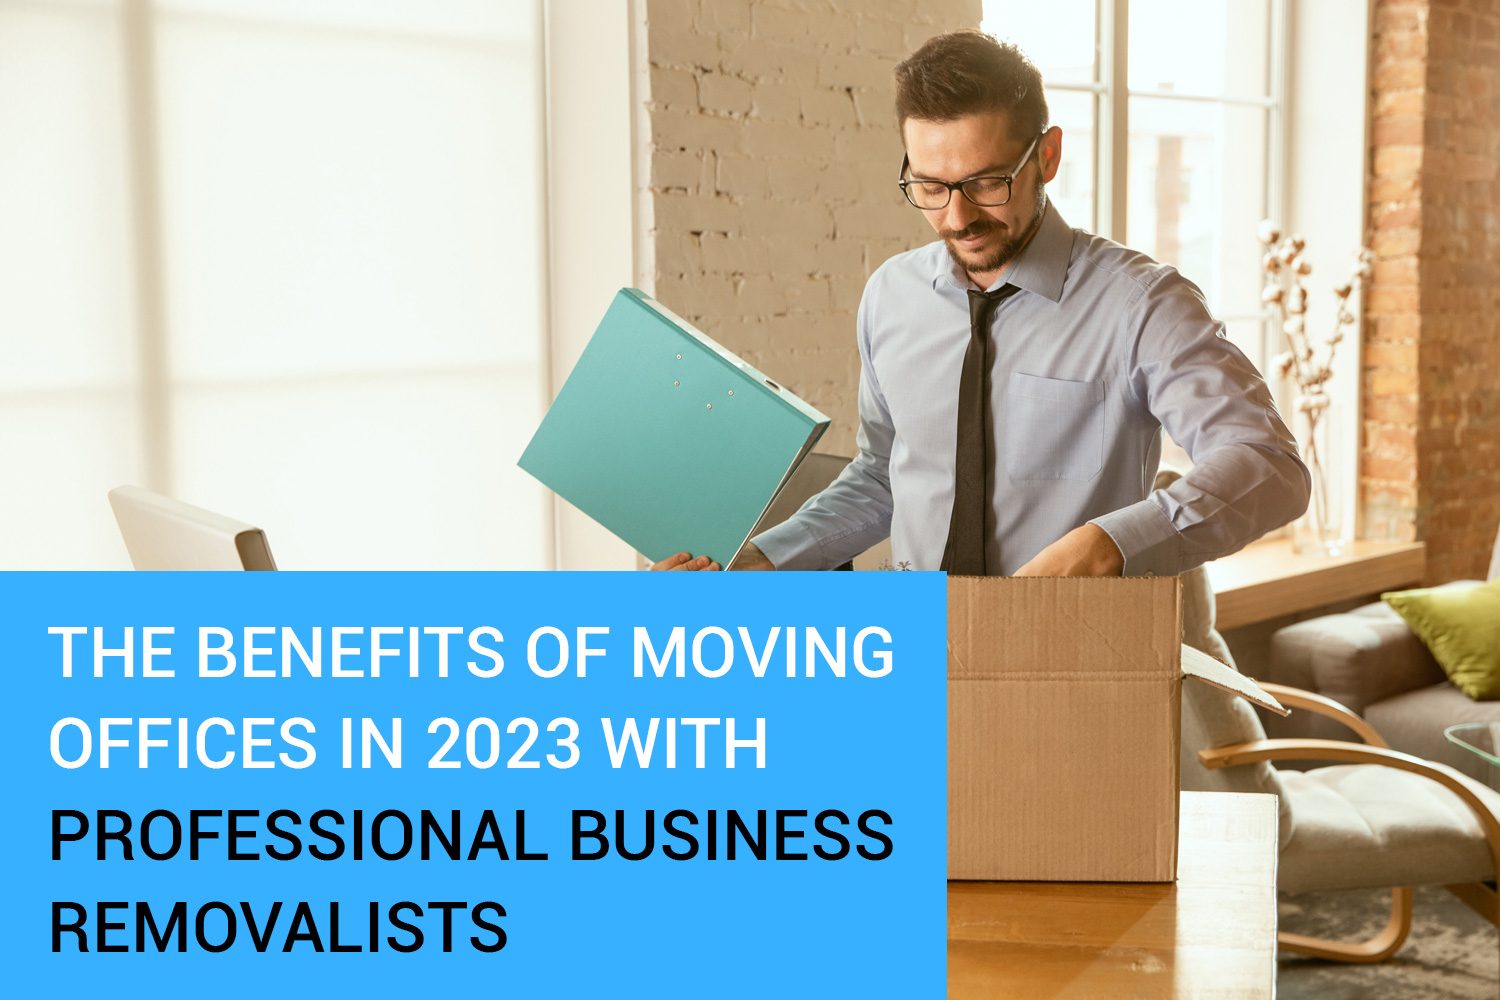 The Benefits of Moving Offices in 2023 with Professional Business Removalists